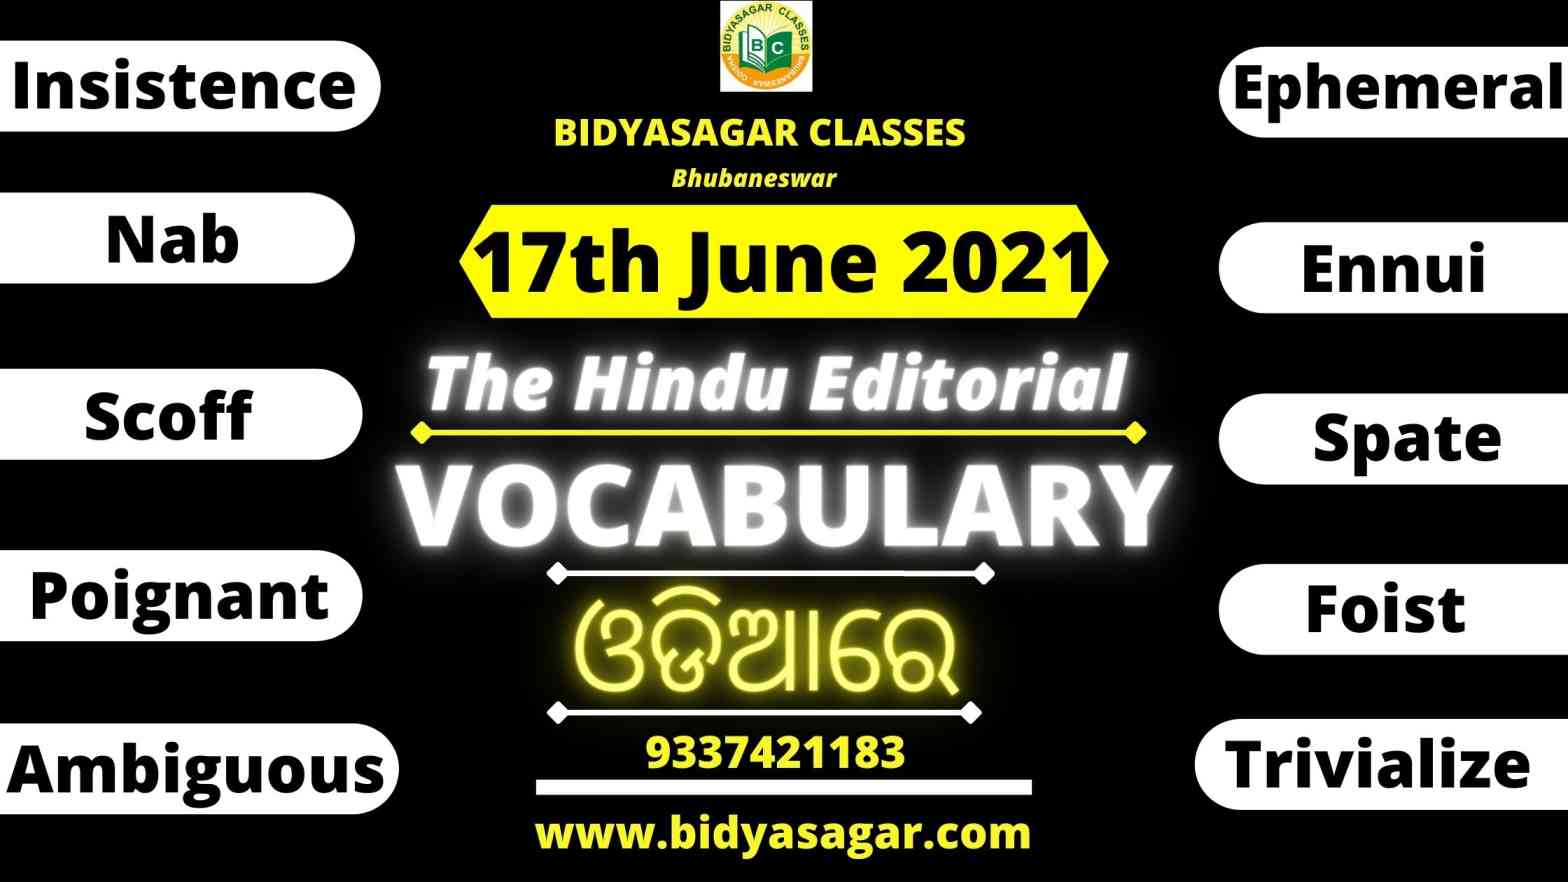 The Hindu Editorial Vocabulary of 17th June 2021